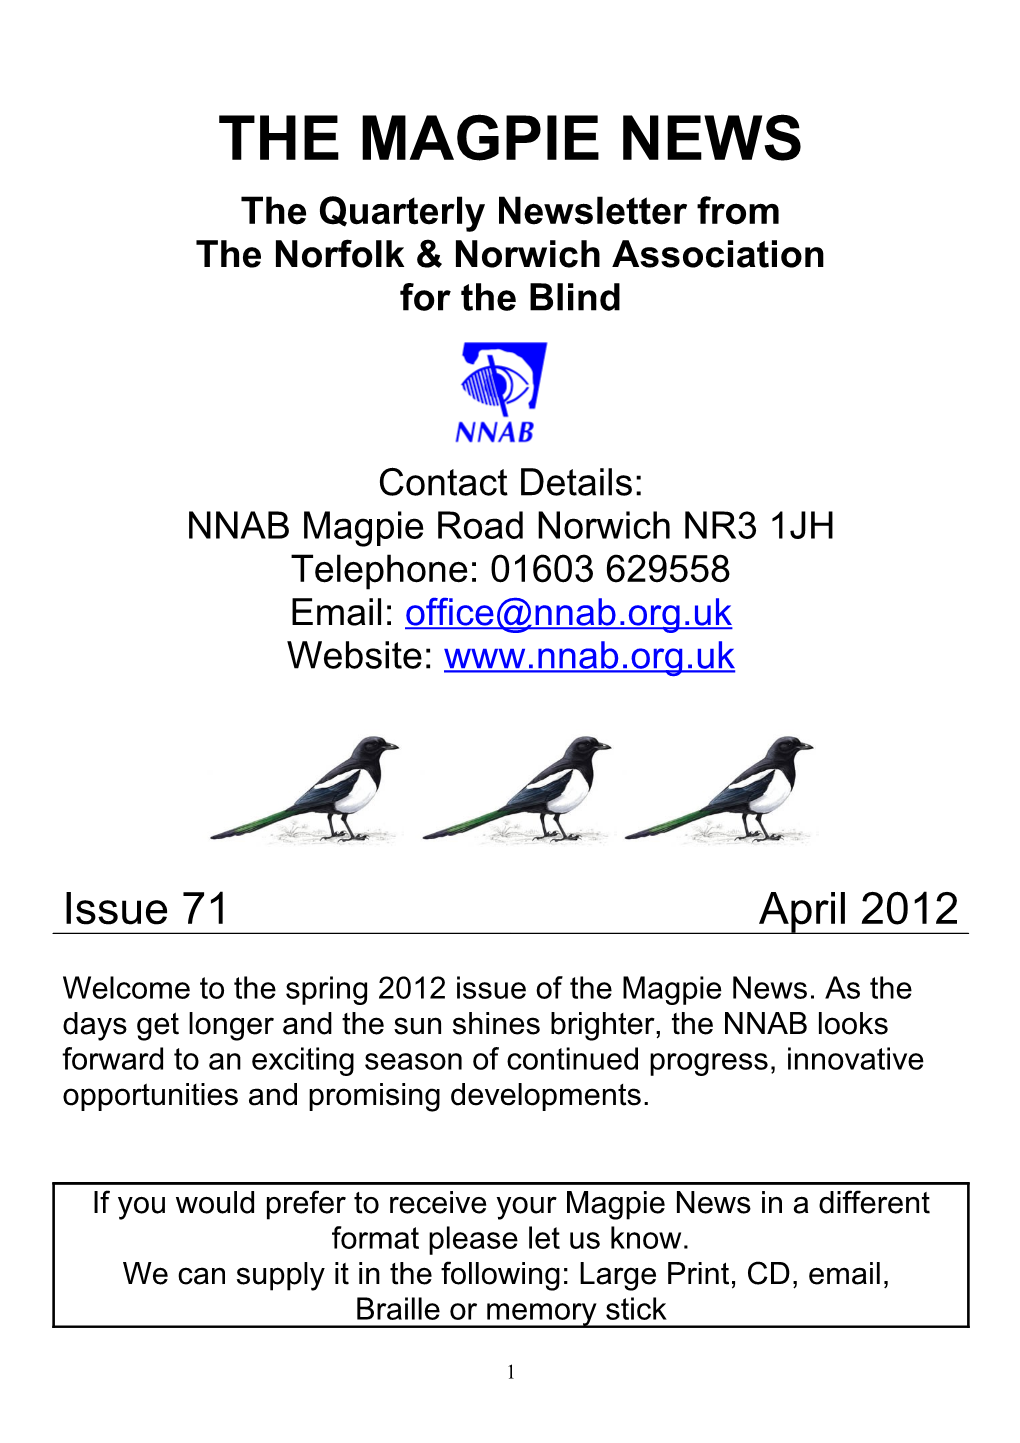 The Magpie News